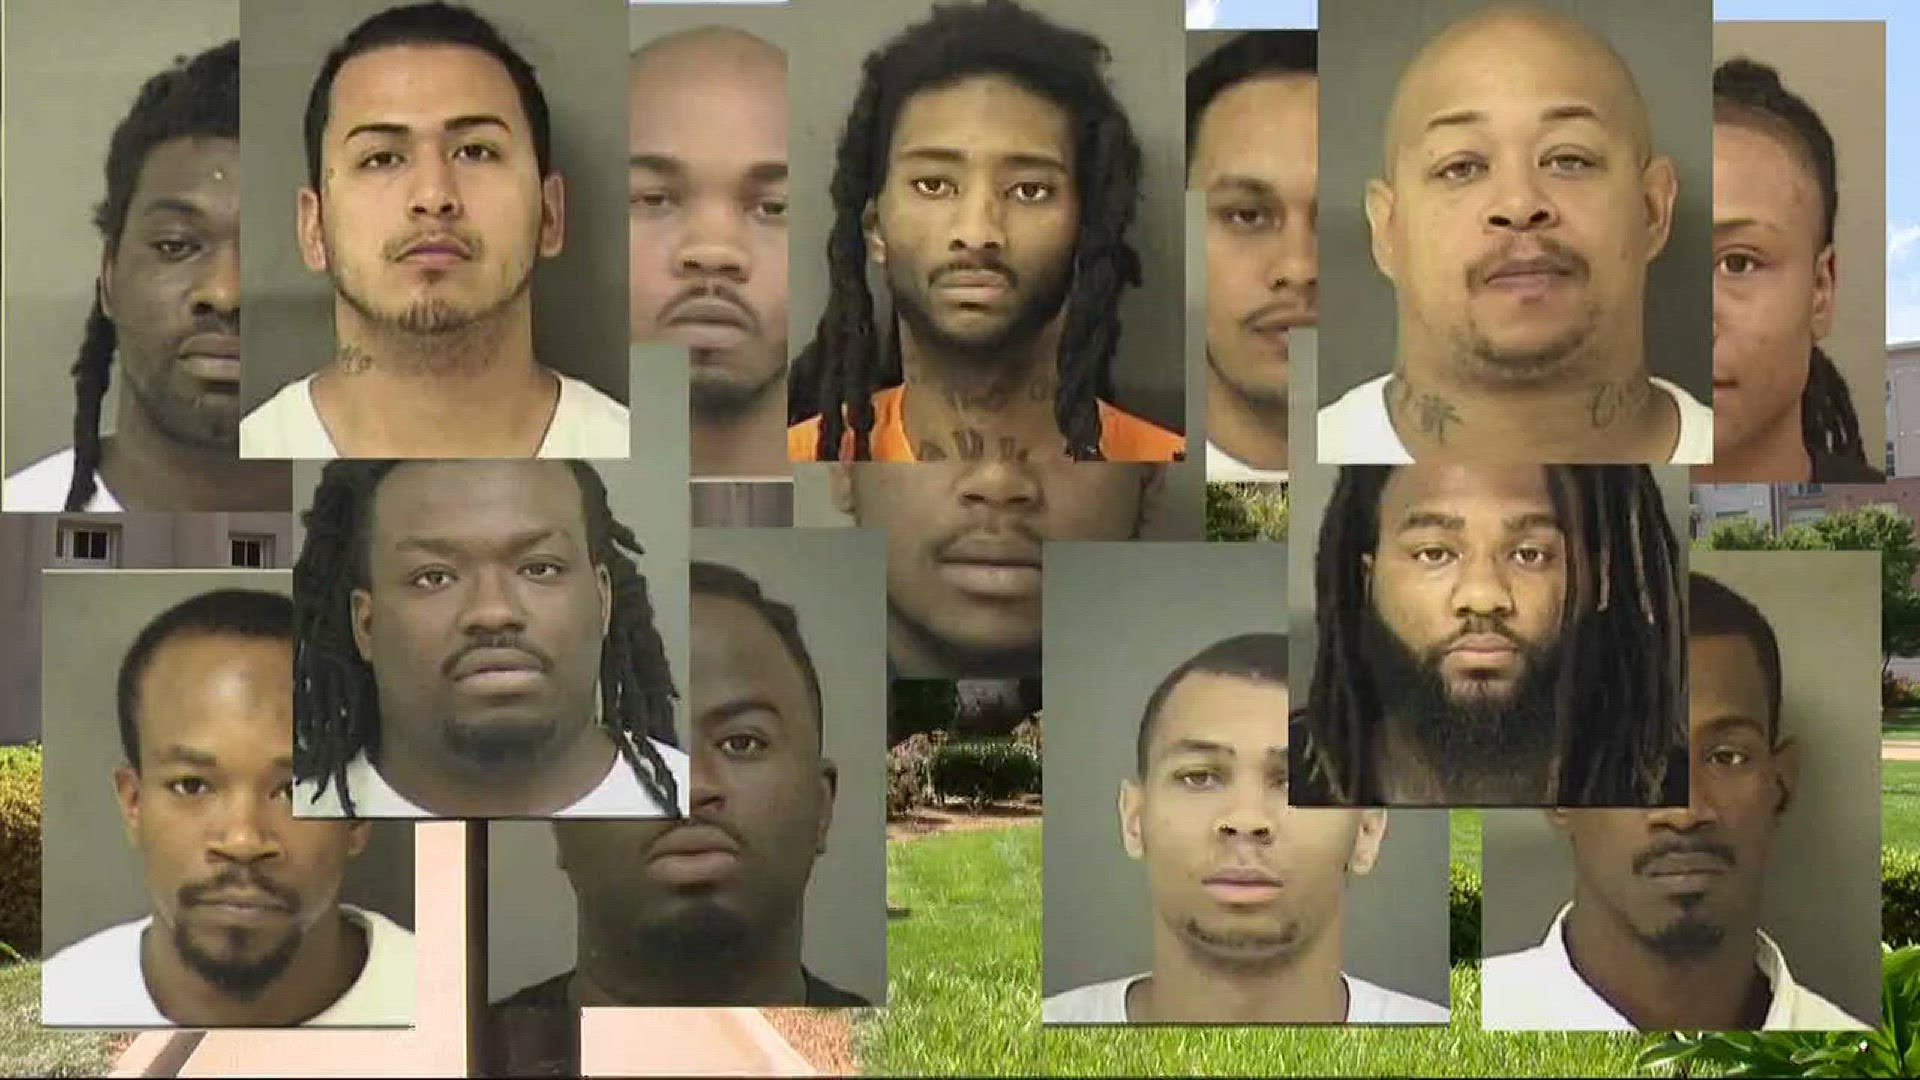 In what is being called one of the largest indictments ever handed down in the Western District of North Carolina, 83 alleged members of the United Blood Nation gang were charged with a slew of crimes Thursday.